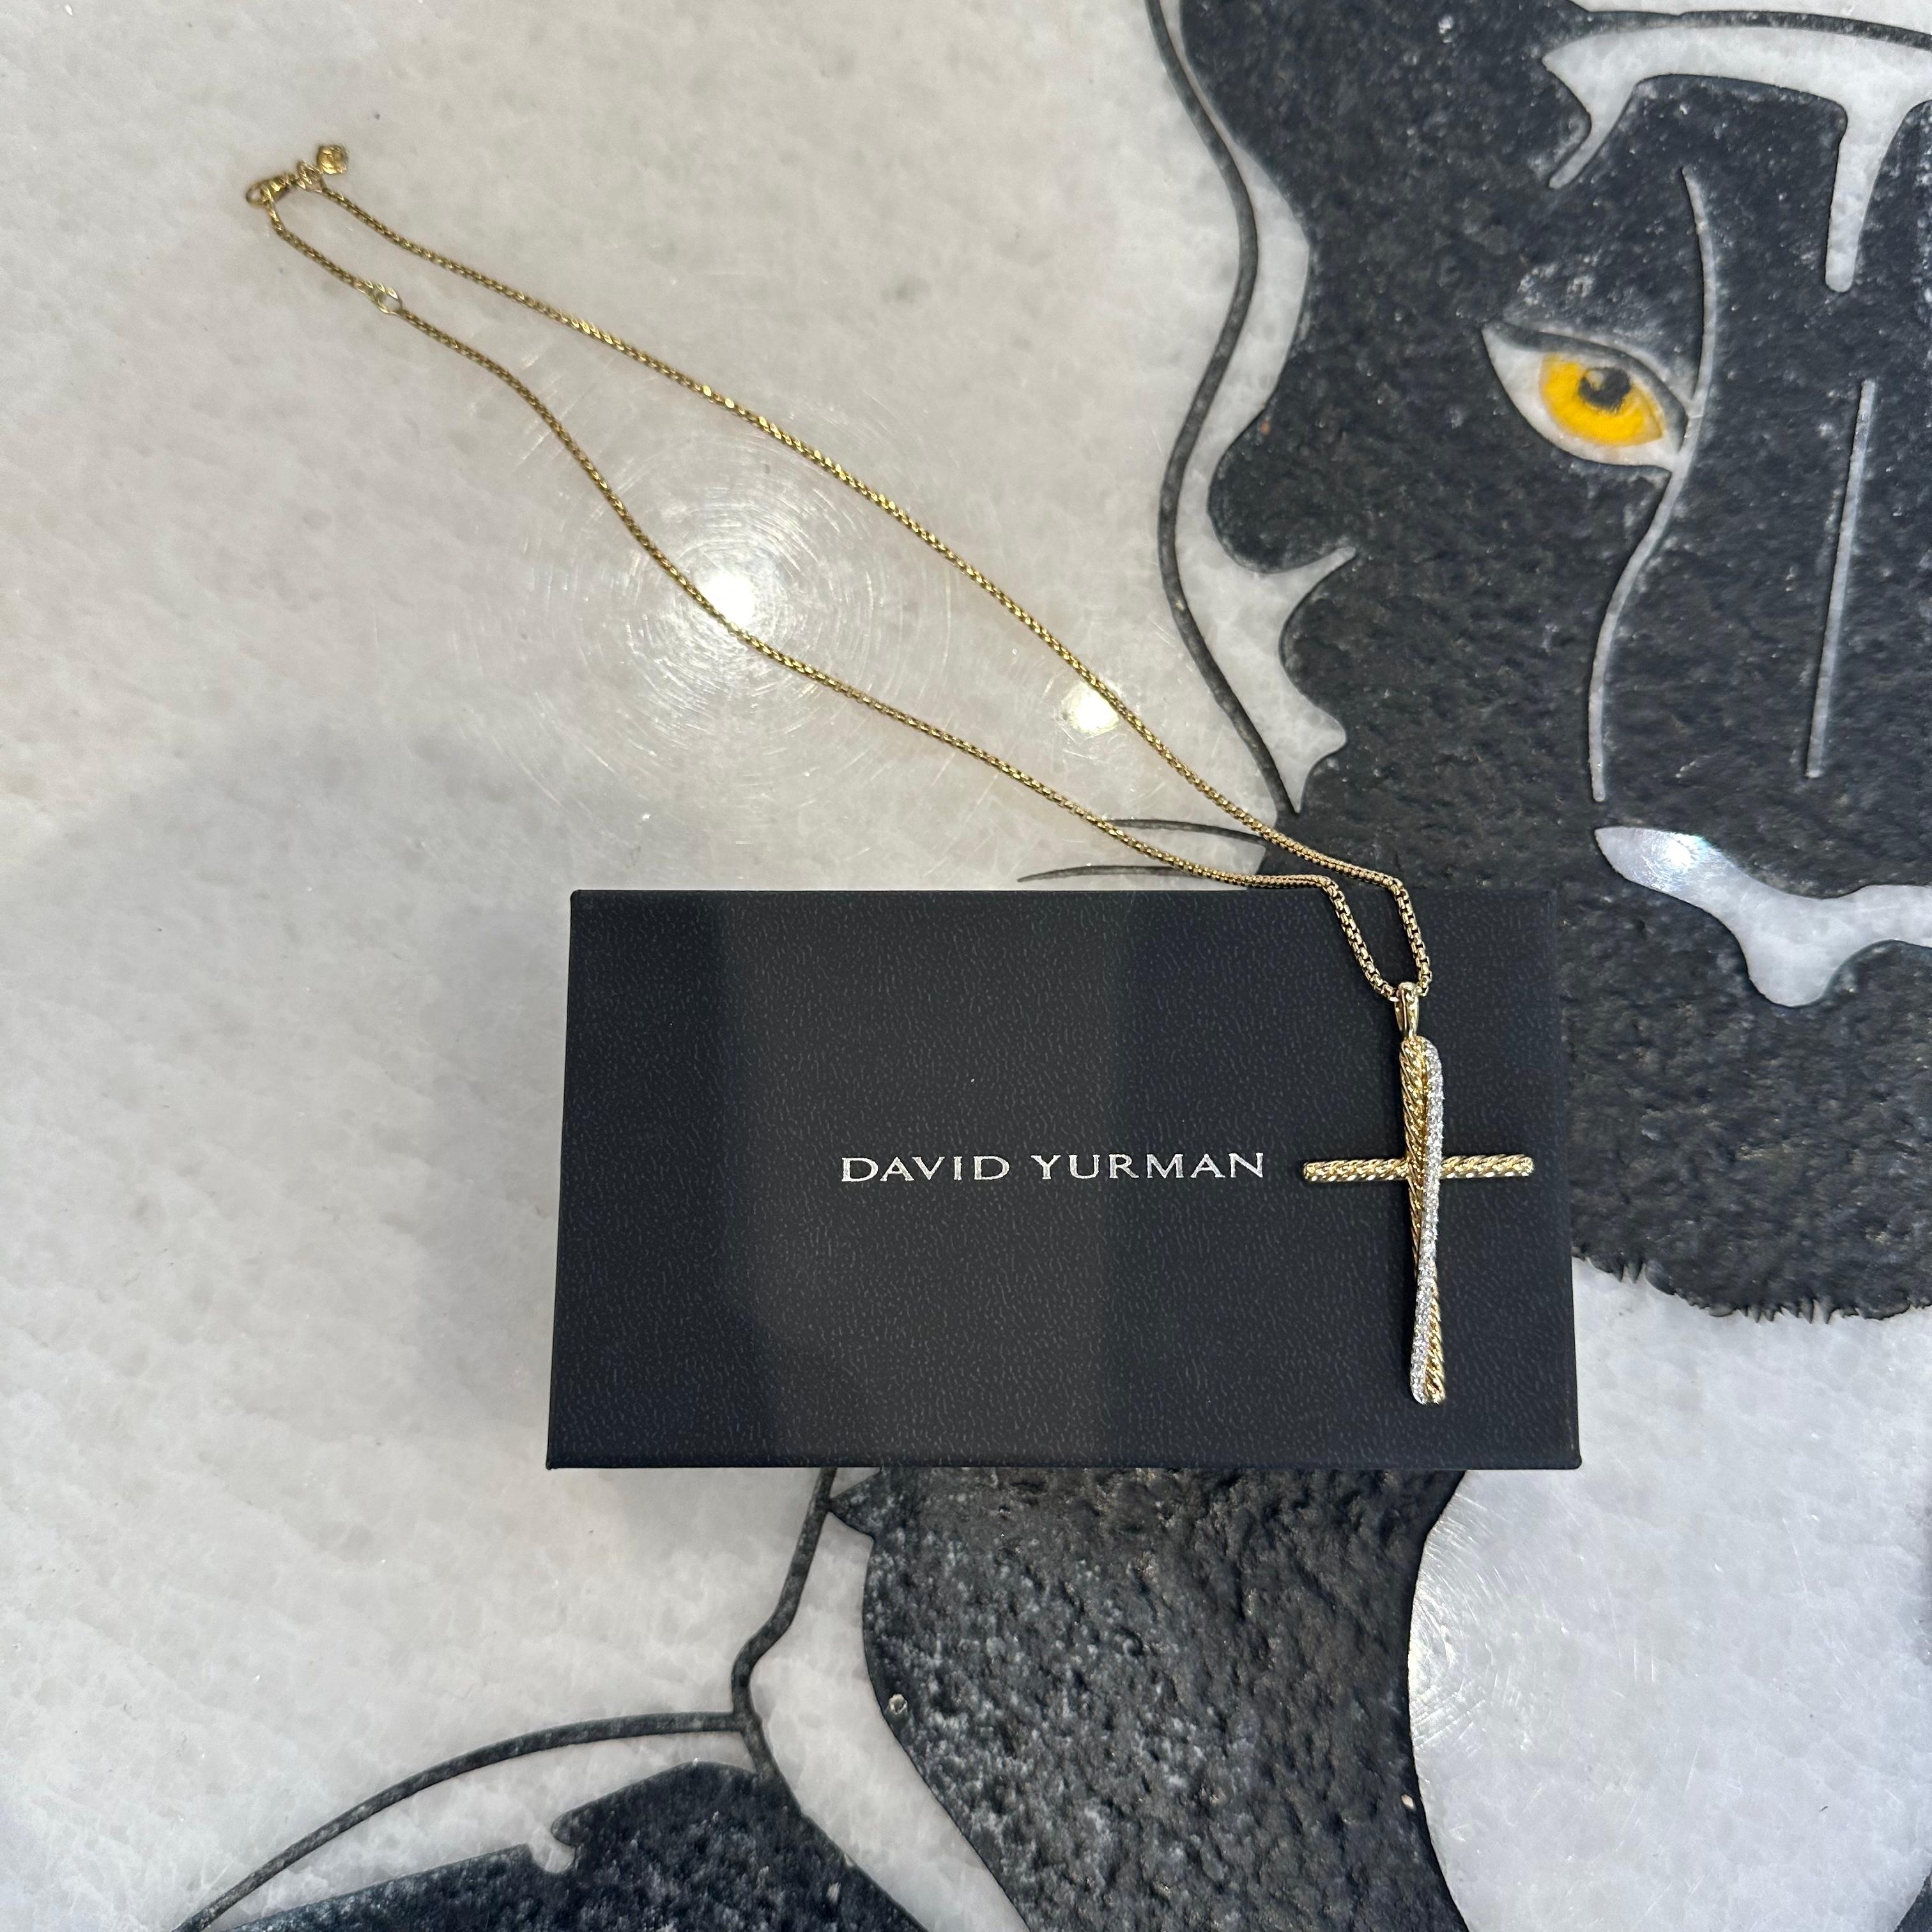 Designer: David Yurman

Collection: Cable Classics

Model: Crossover Cross

Style:  Pendant necklace

Chain: Box link

Pendant size: 35.6mm x 19.5mm

Metal: 18k Yellow Gold

Metal Purity: 18k

Stones: Round Brilliant Cut Diamonds

Total Carat